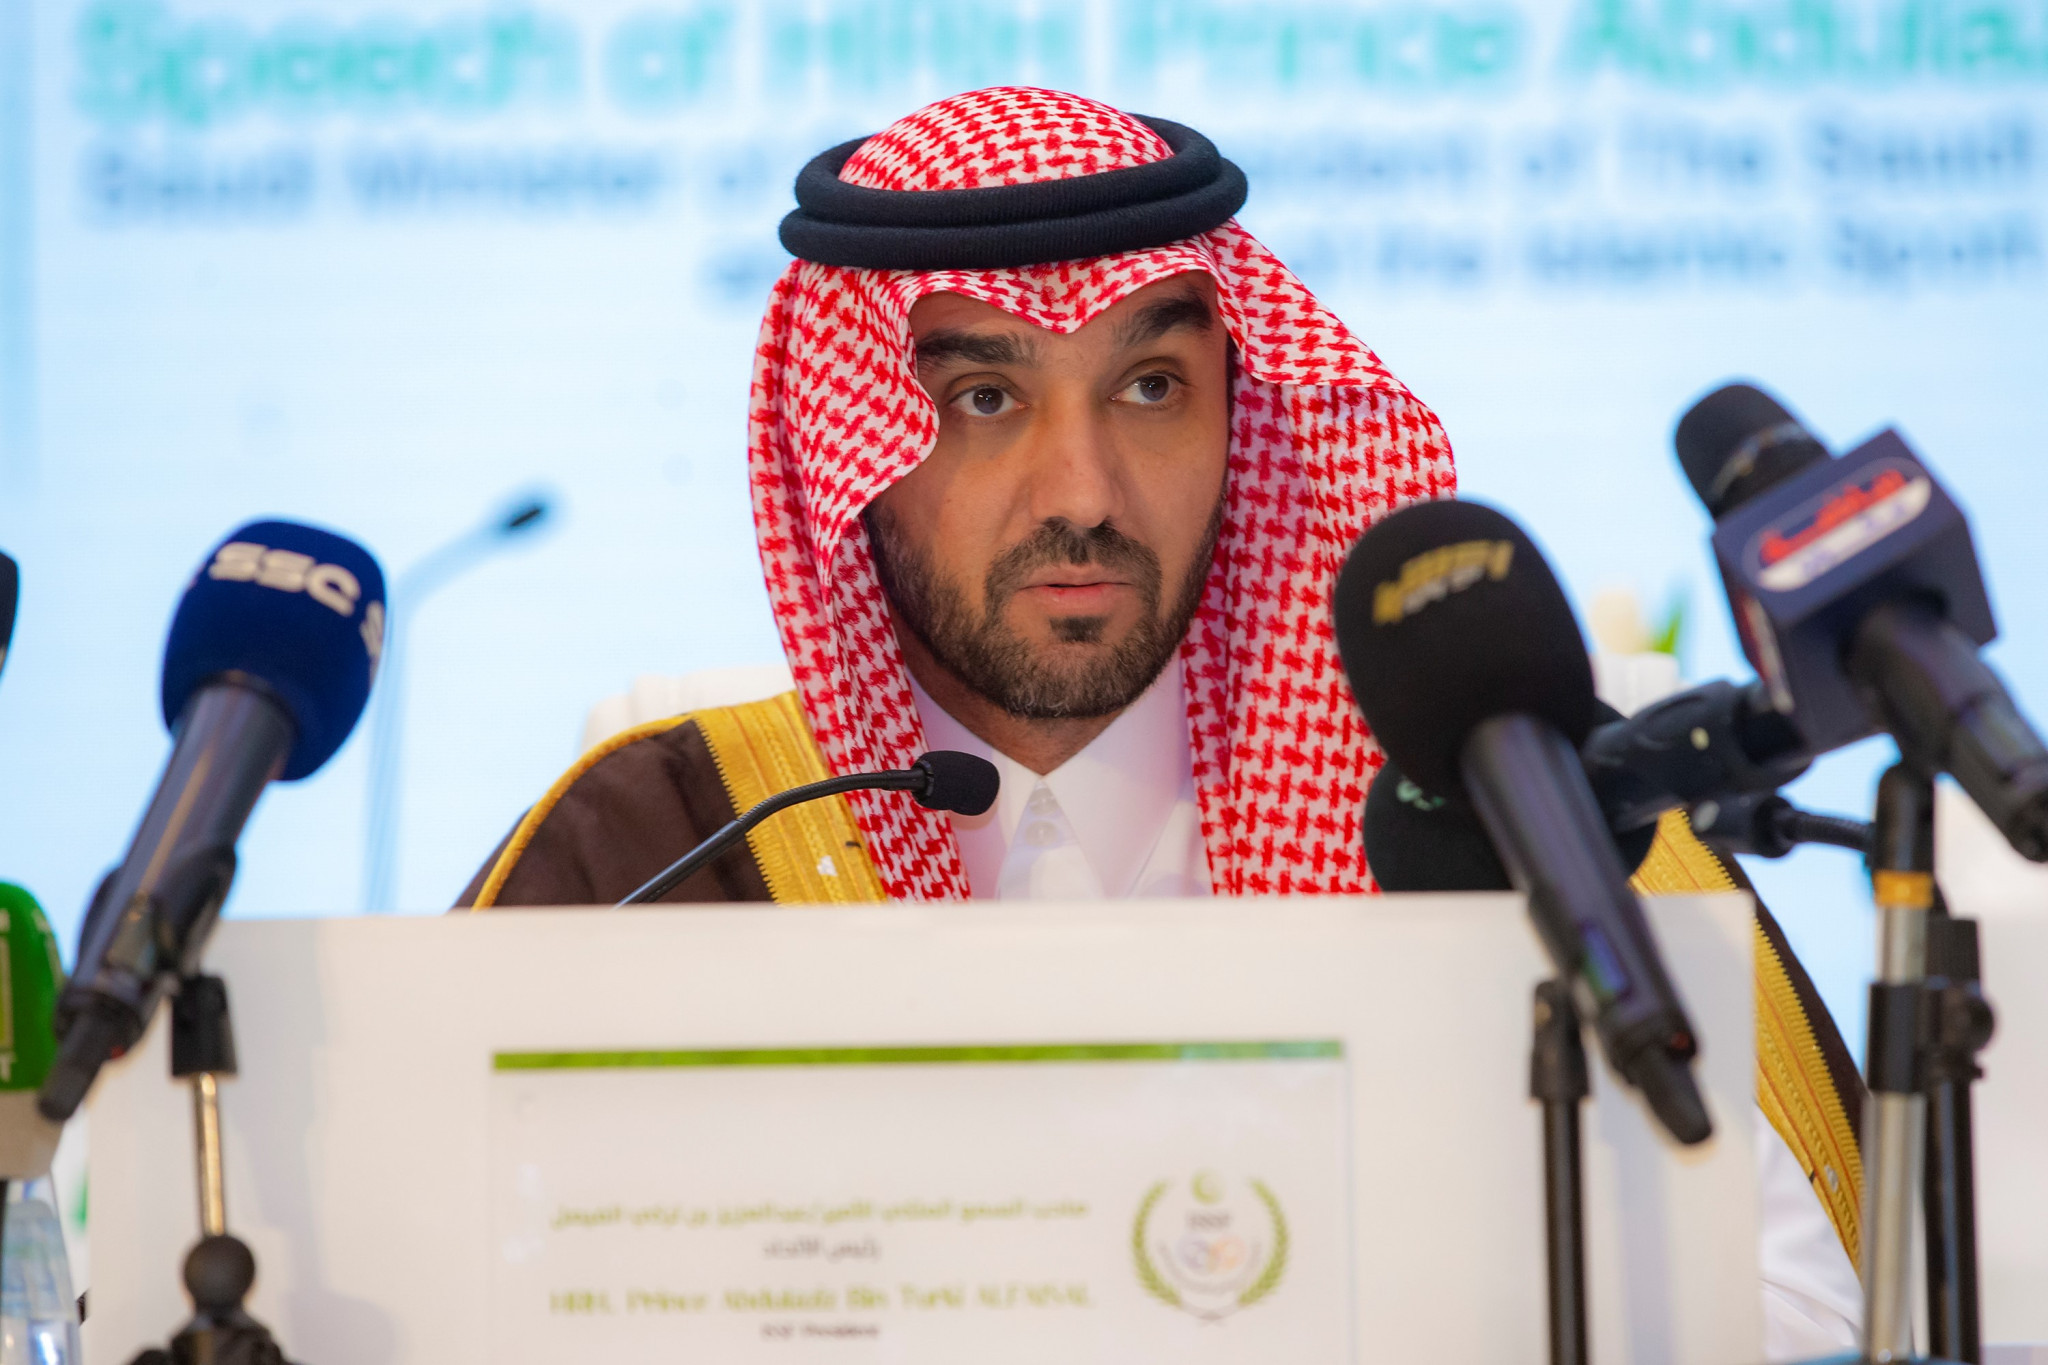 ISSF President Prince Abdulaziz Bin Turki Al Faisal is also head of the Saudi Olympic & Paralympic Committee and the country's Sports Minister ©SOPC